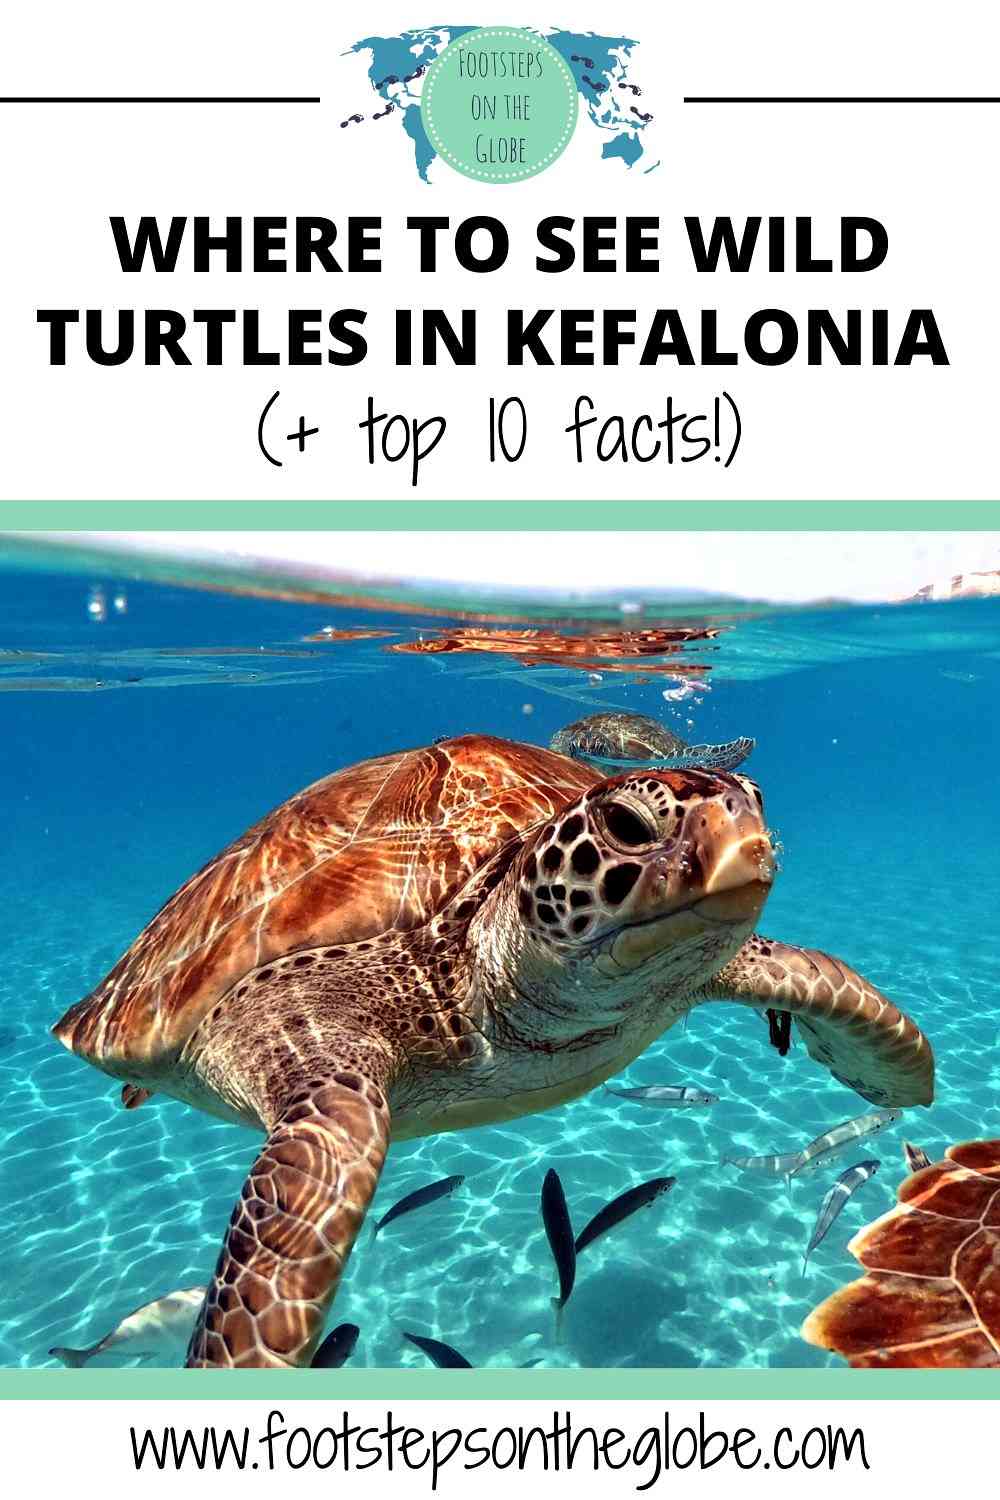 Sea turtle swimming towards the camera with the text: "Where to see wild turtles in Kefalonia (+top 10 facts!) pinterest image